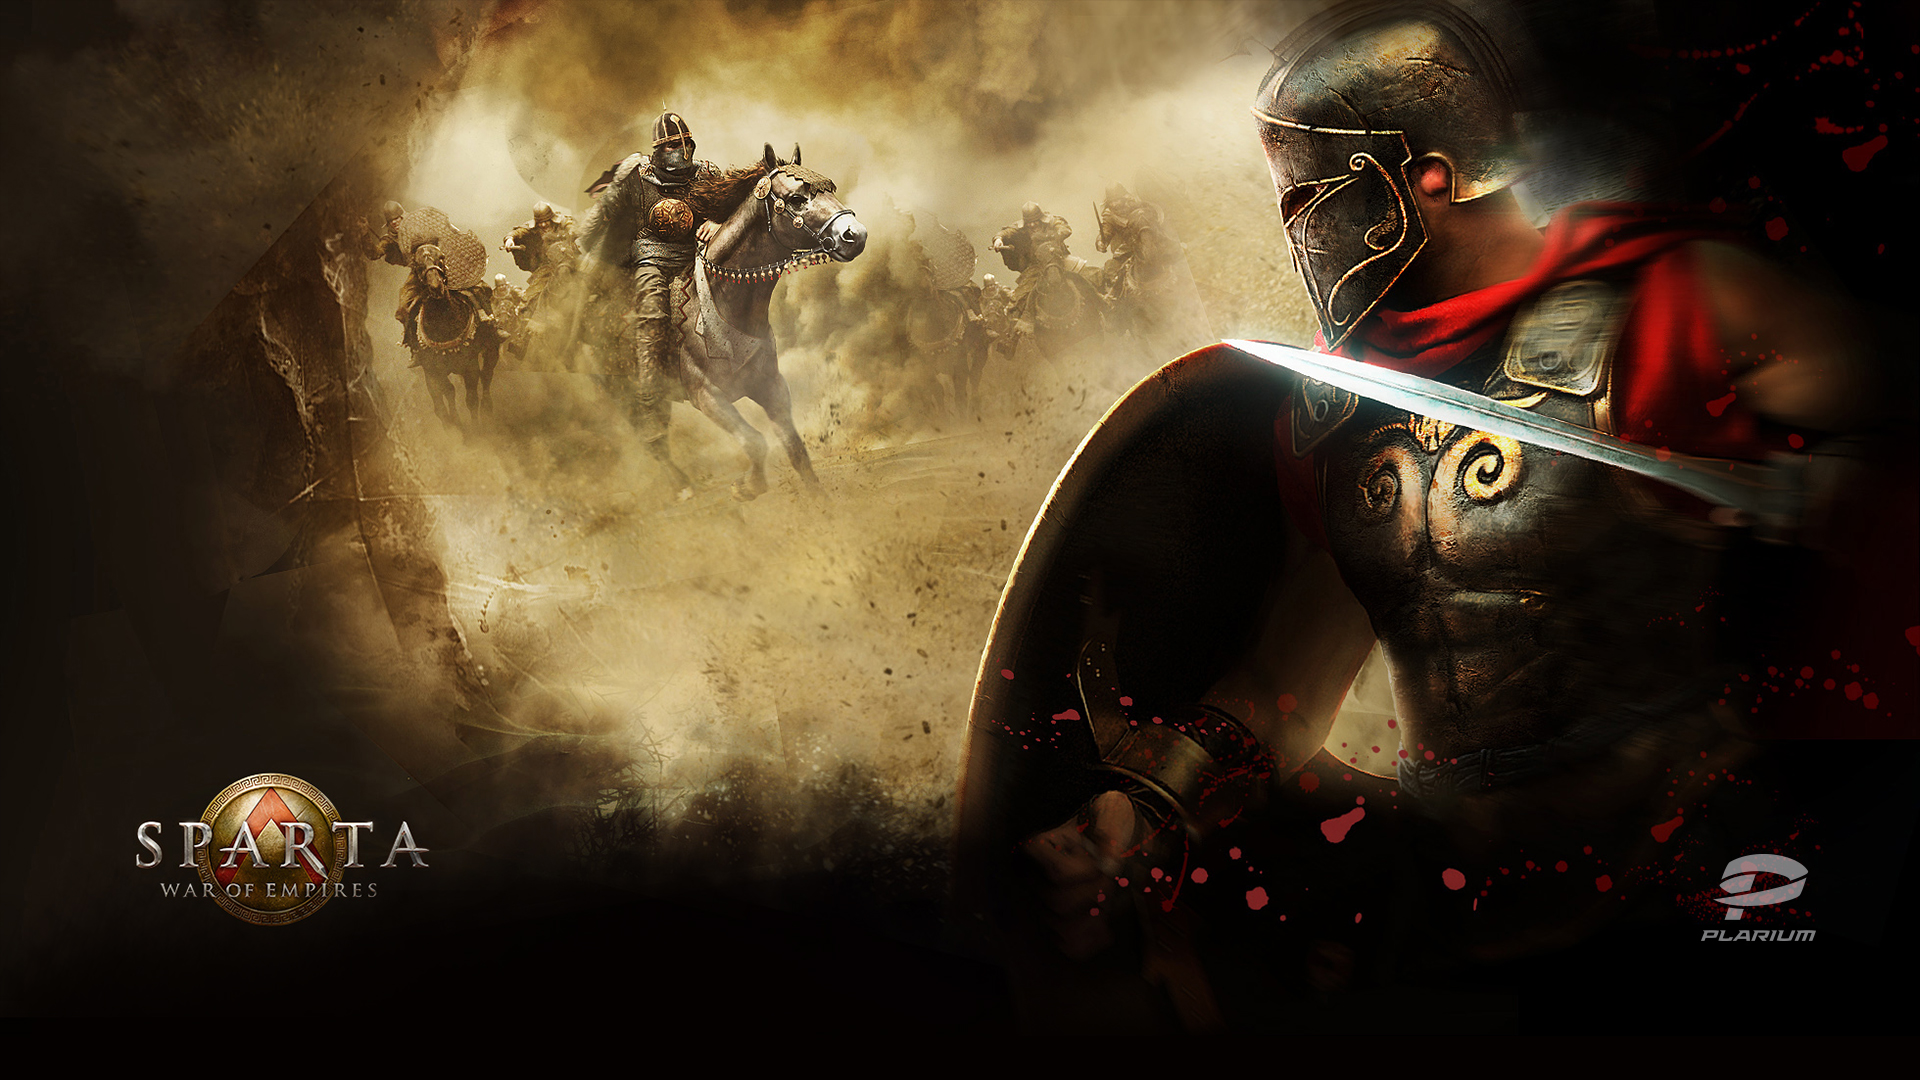 Sparta War Of Empires Pictures To Pin